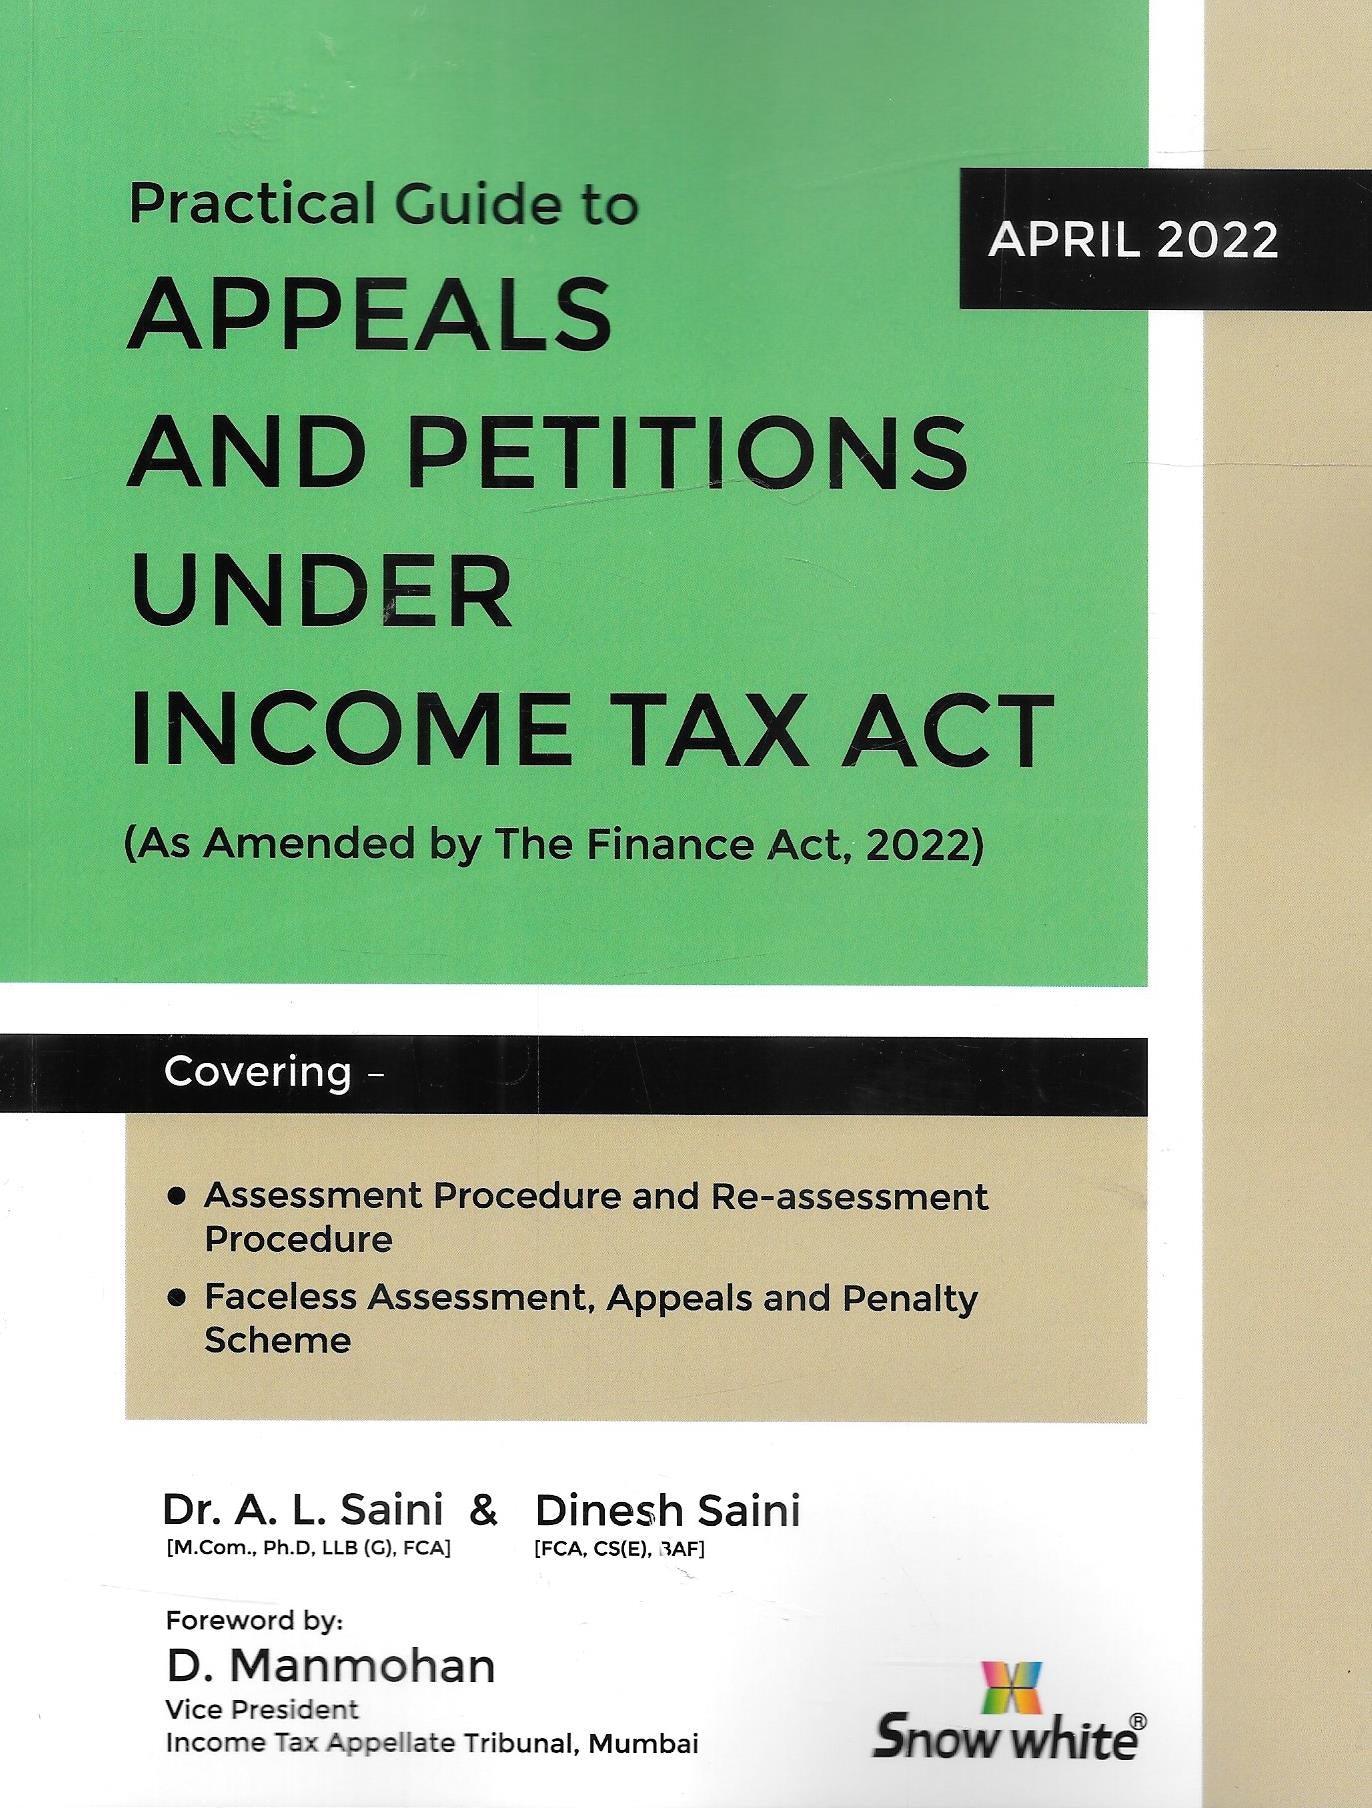 Practical Guide To Appeals And Petitions Under Income Tax Act - M&J Services